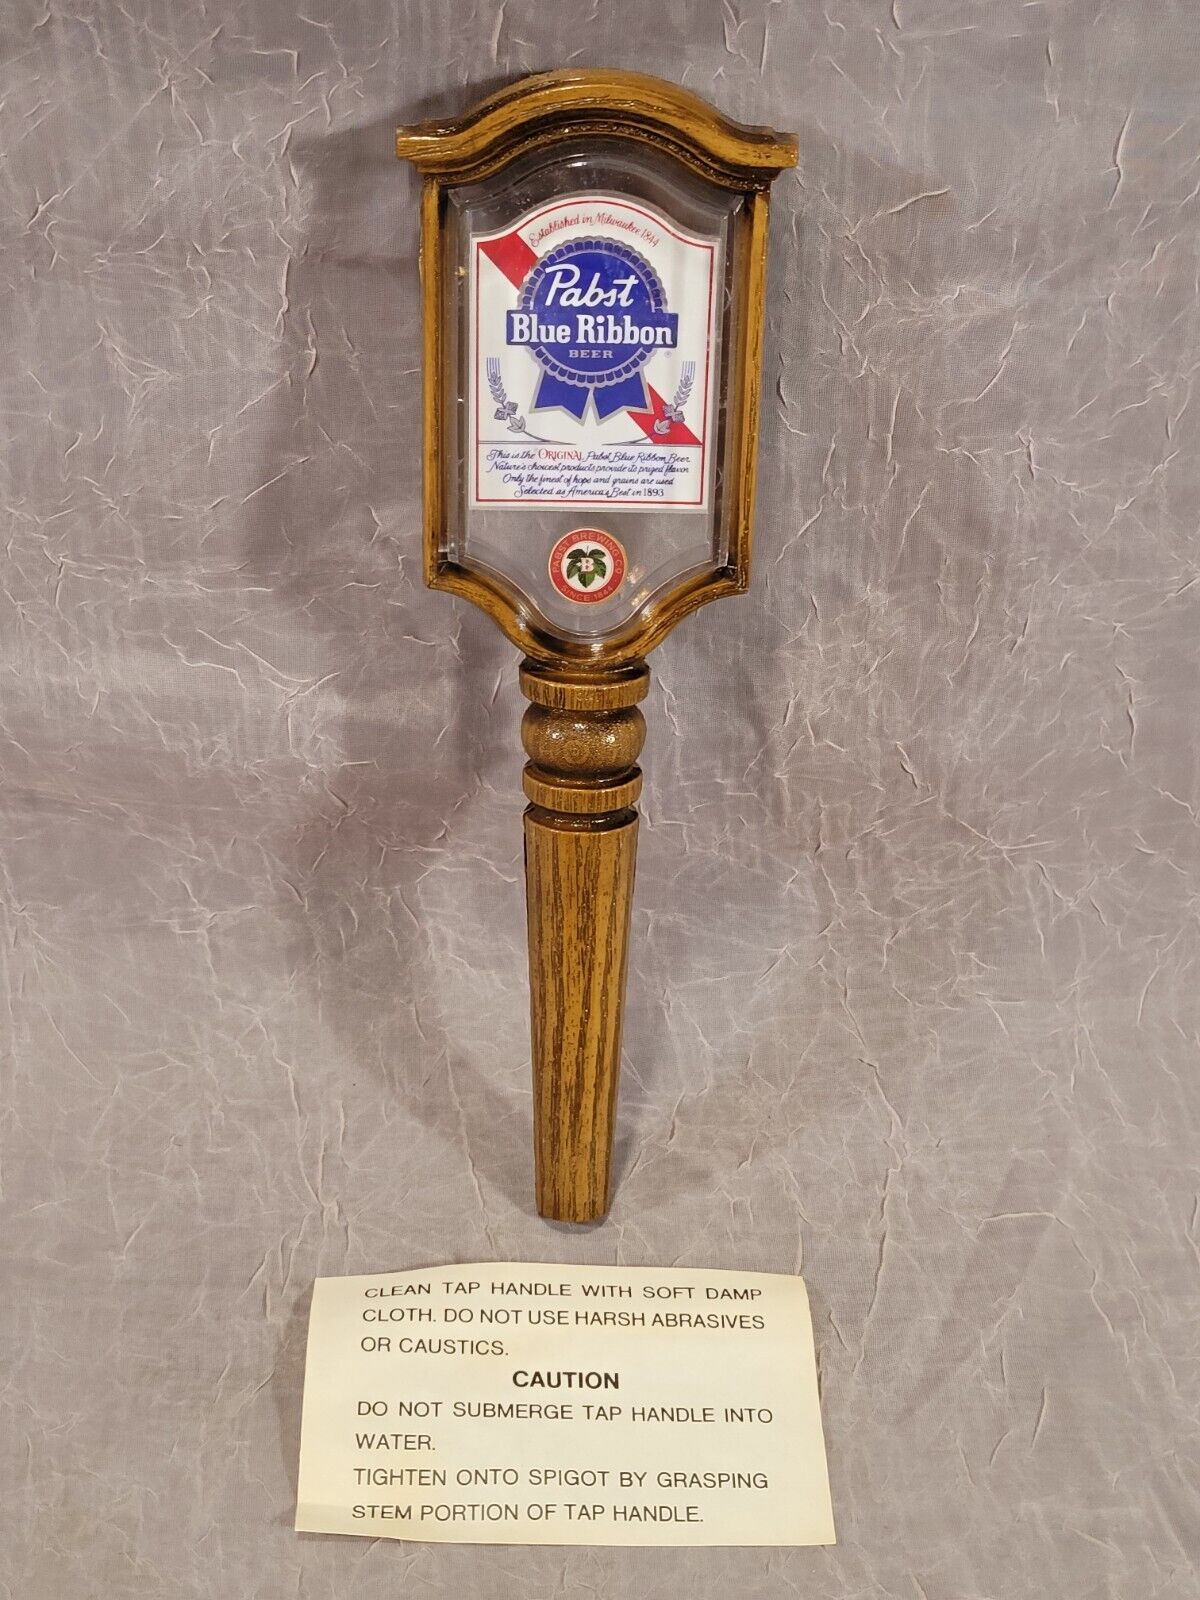 Vintage Pabst Blue Ribbon Beer Tap Handle P-2450 w/ Original Caution Card NEW